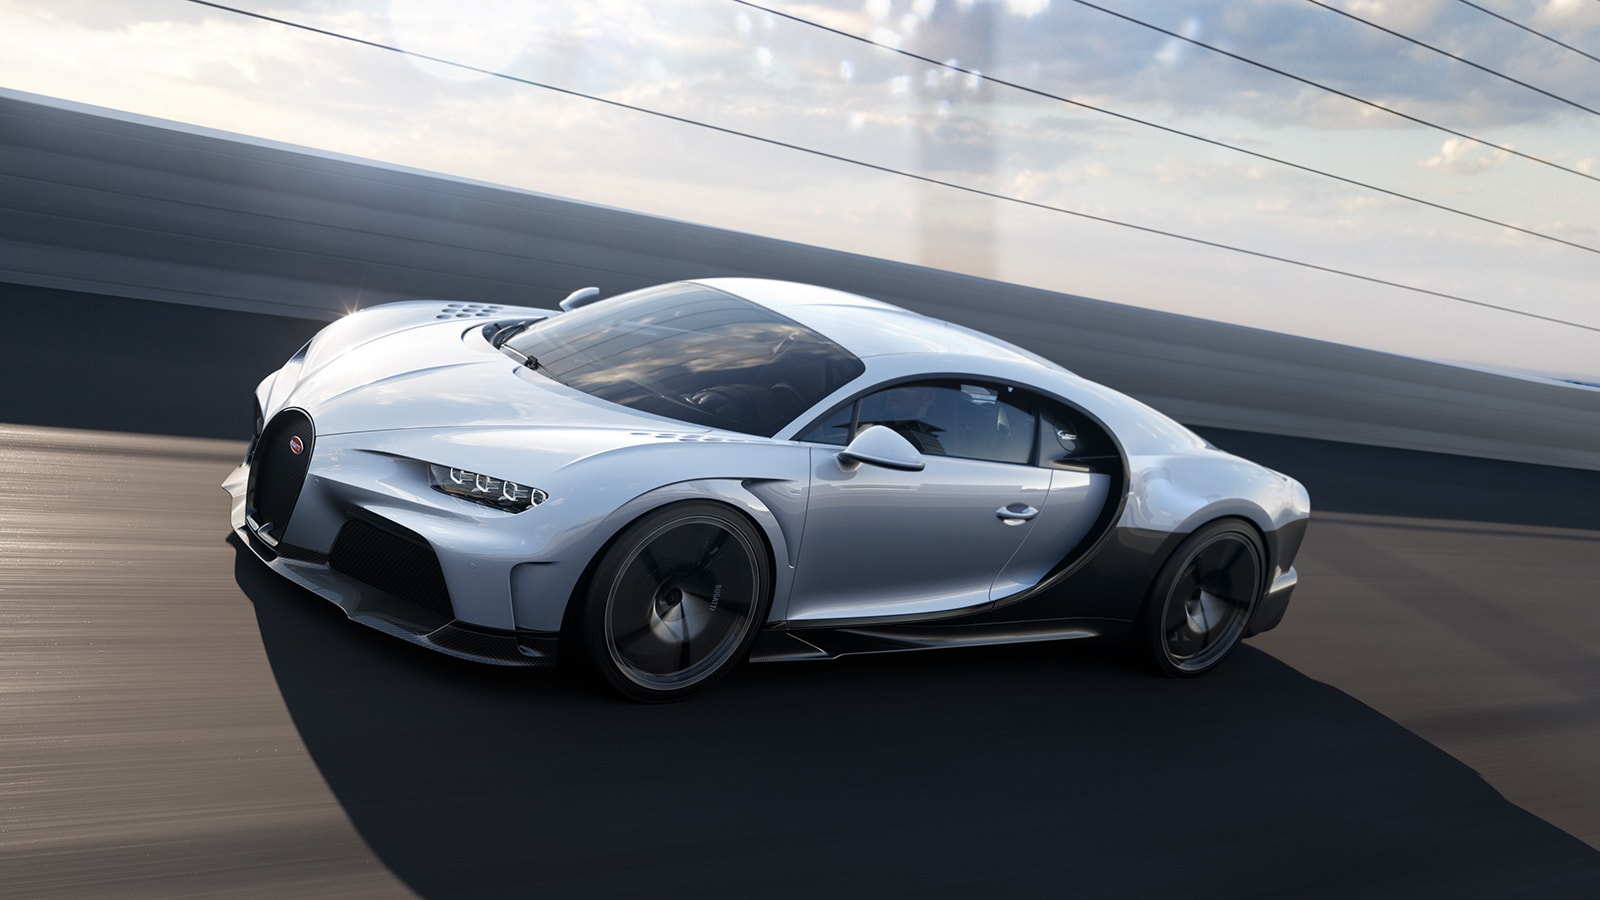 Bugatti begins deliveries of Chiron Super Sport, hits 300 kmph in 12.1  seconds